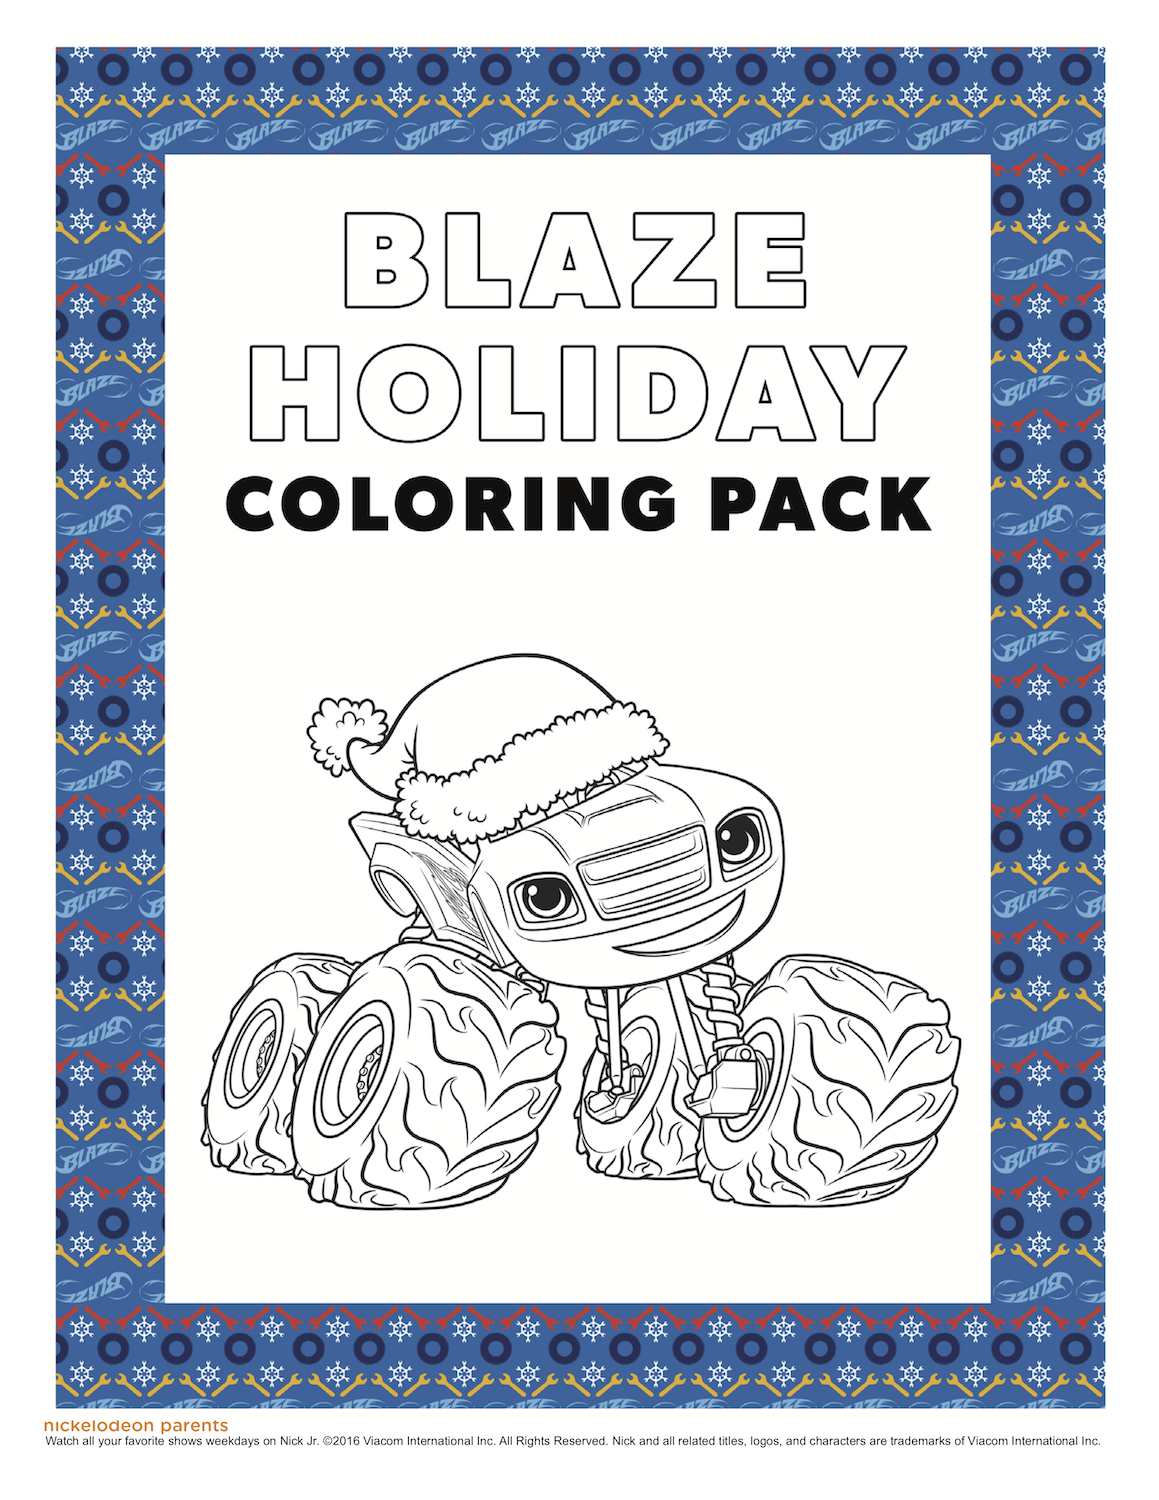 Blaze Holiday Coloring Pack